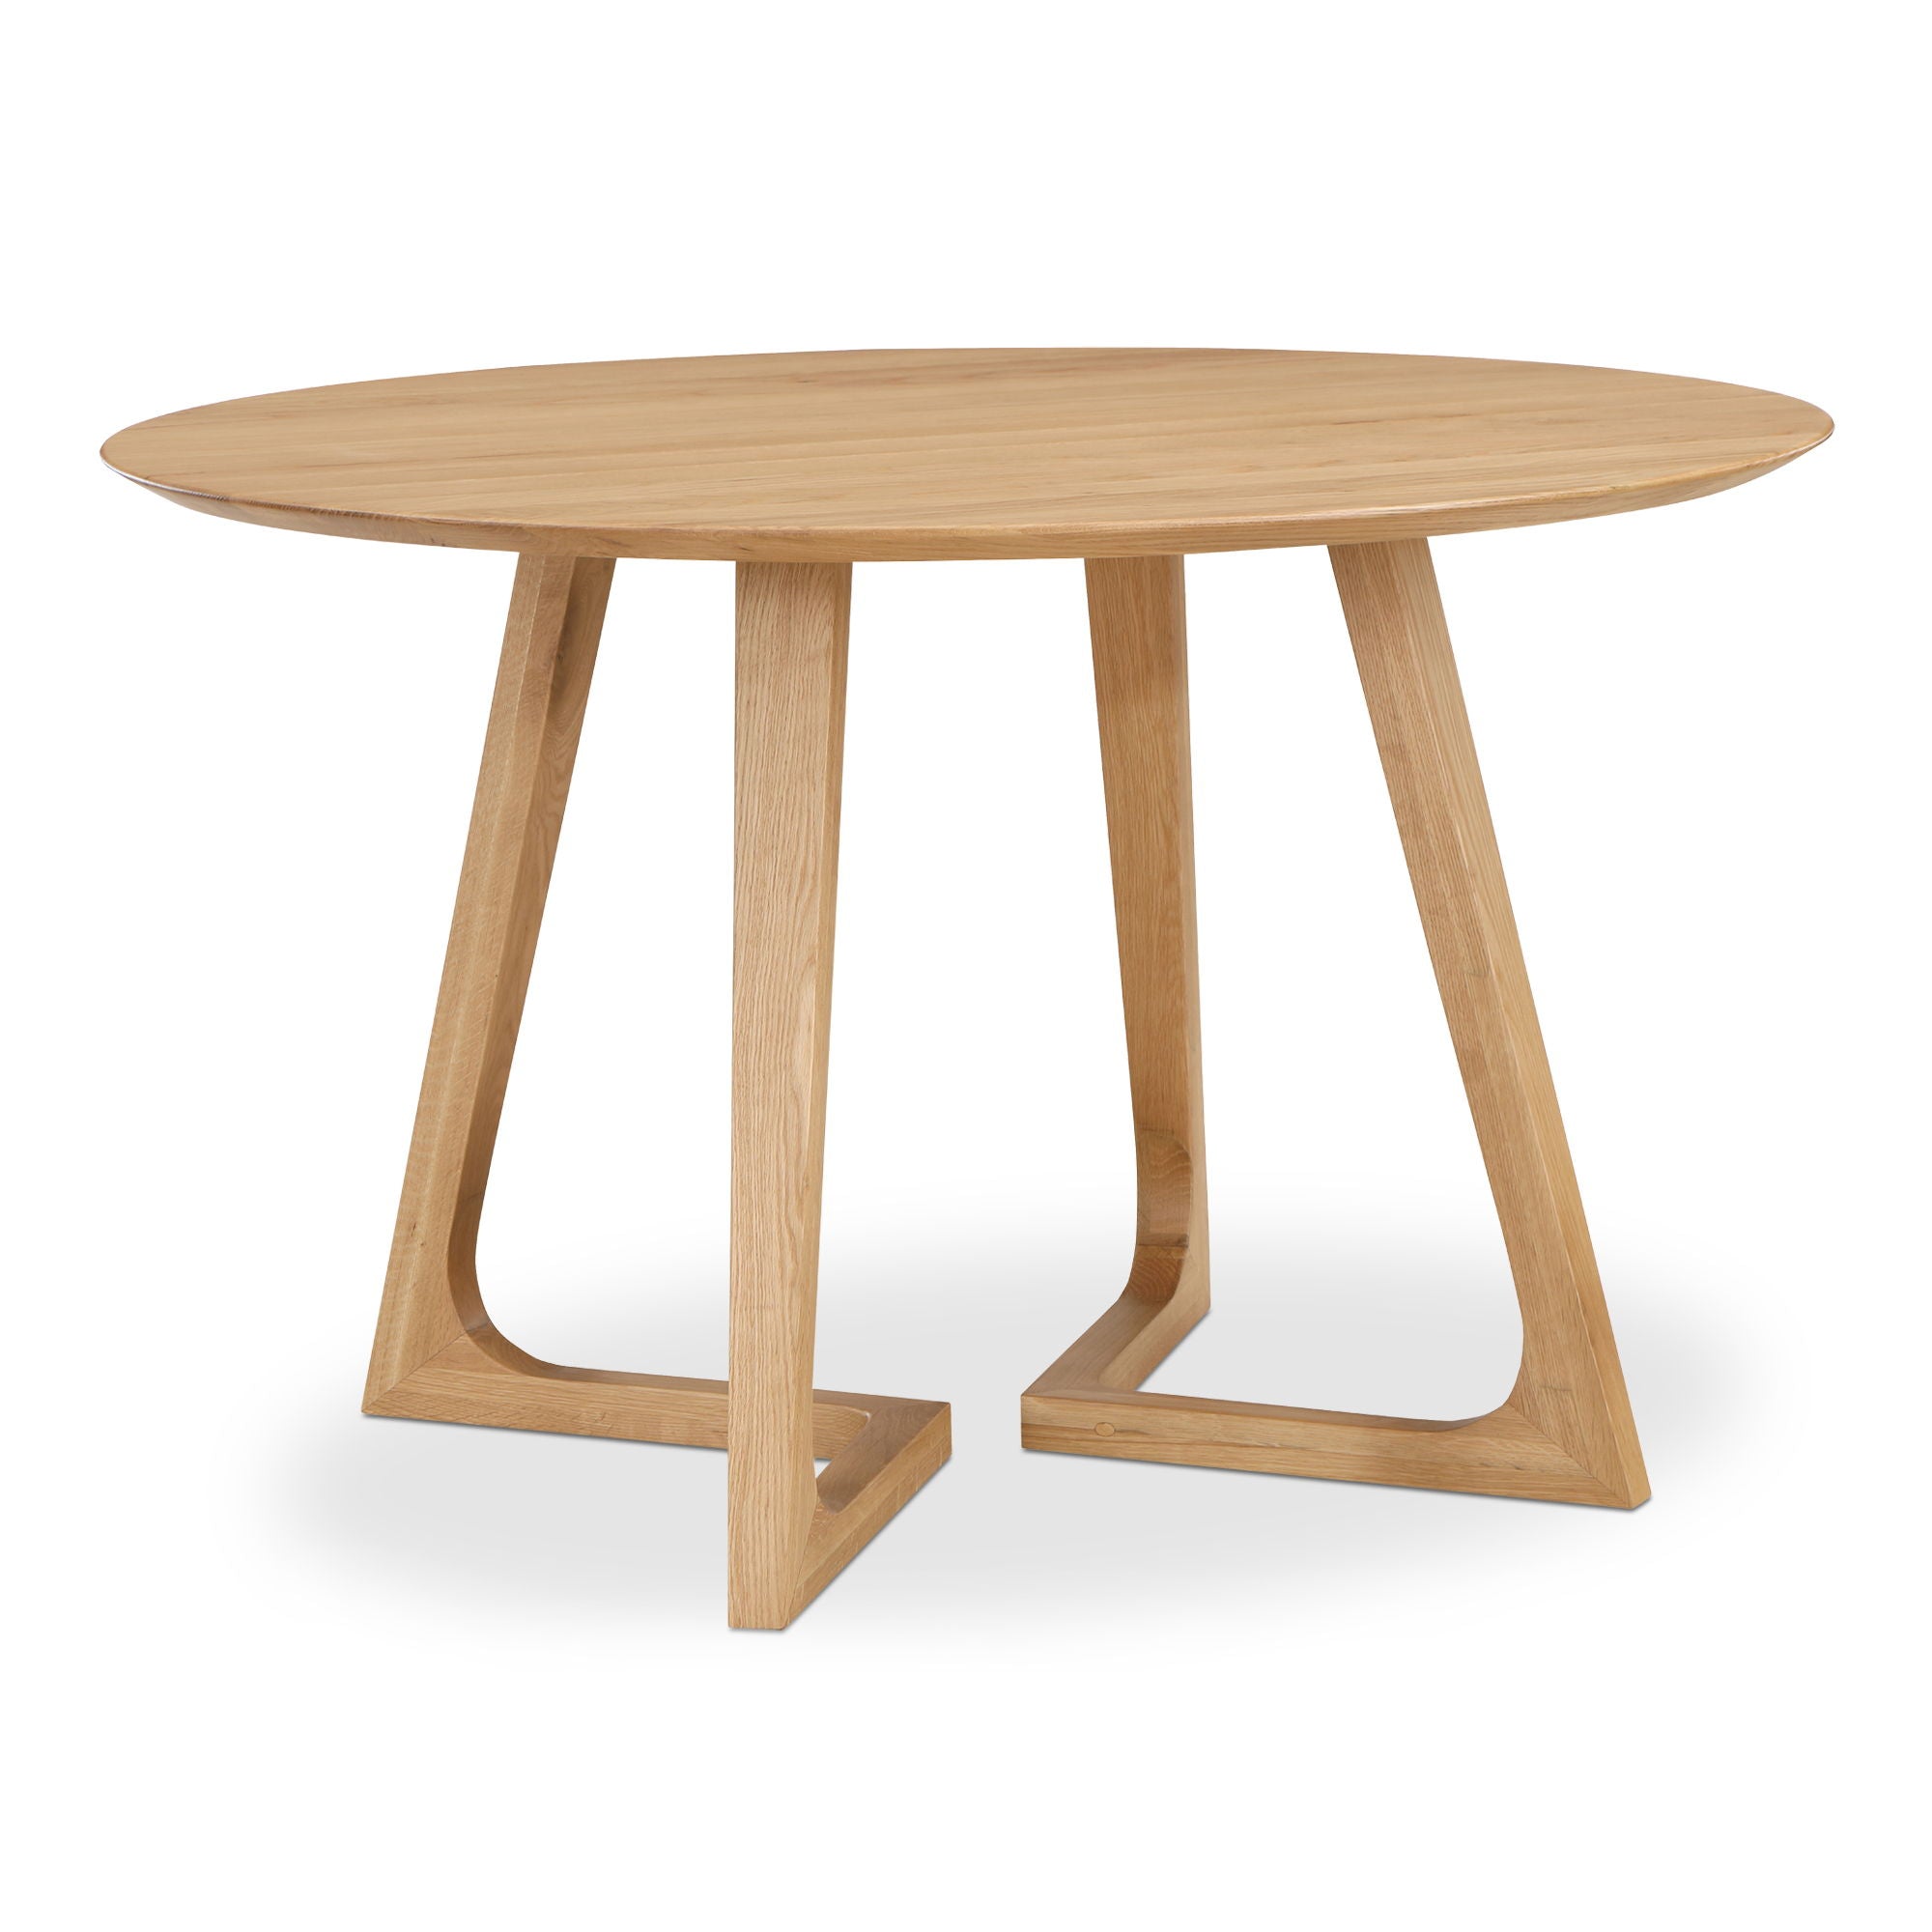 Godenza - Dining Table Round - Light Brown